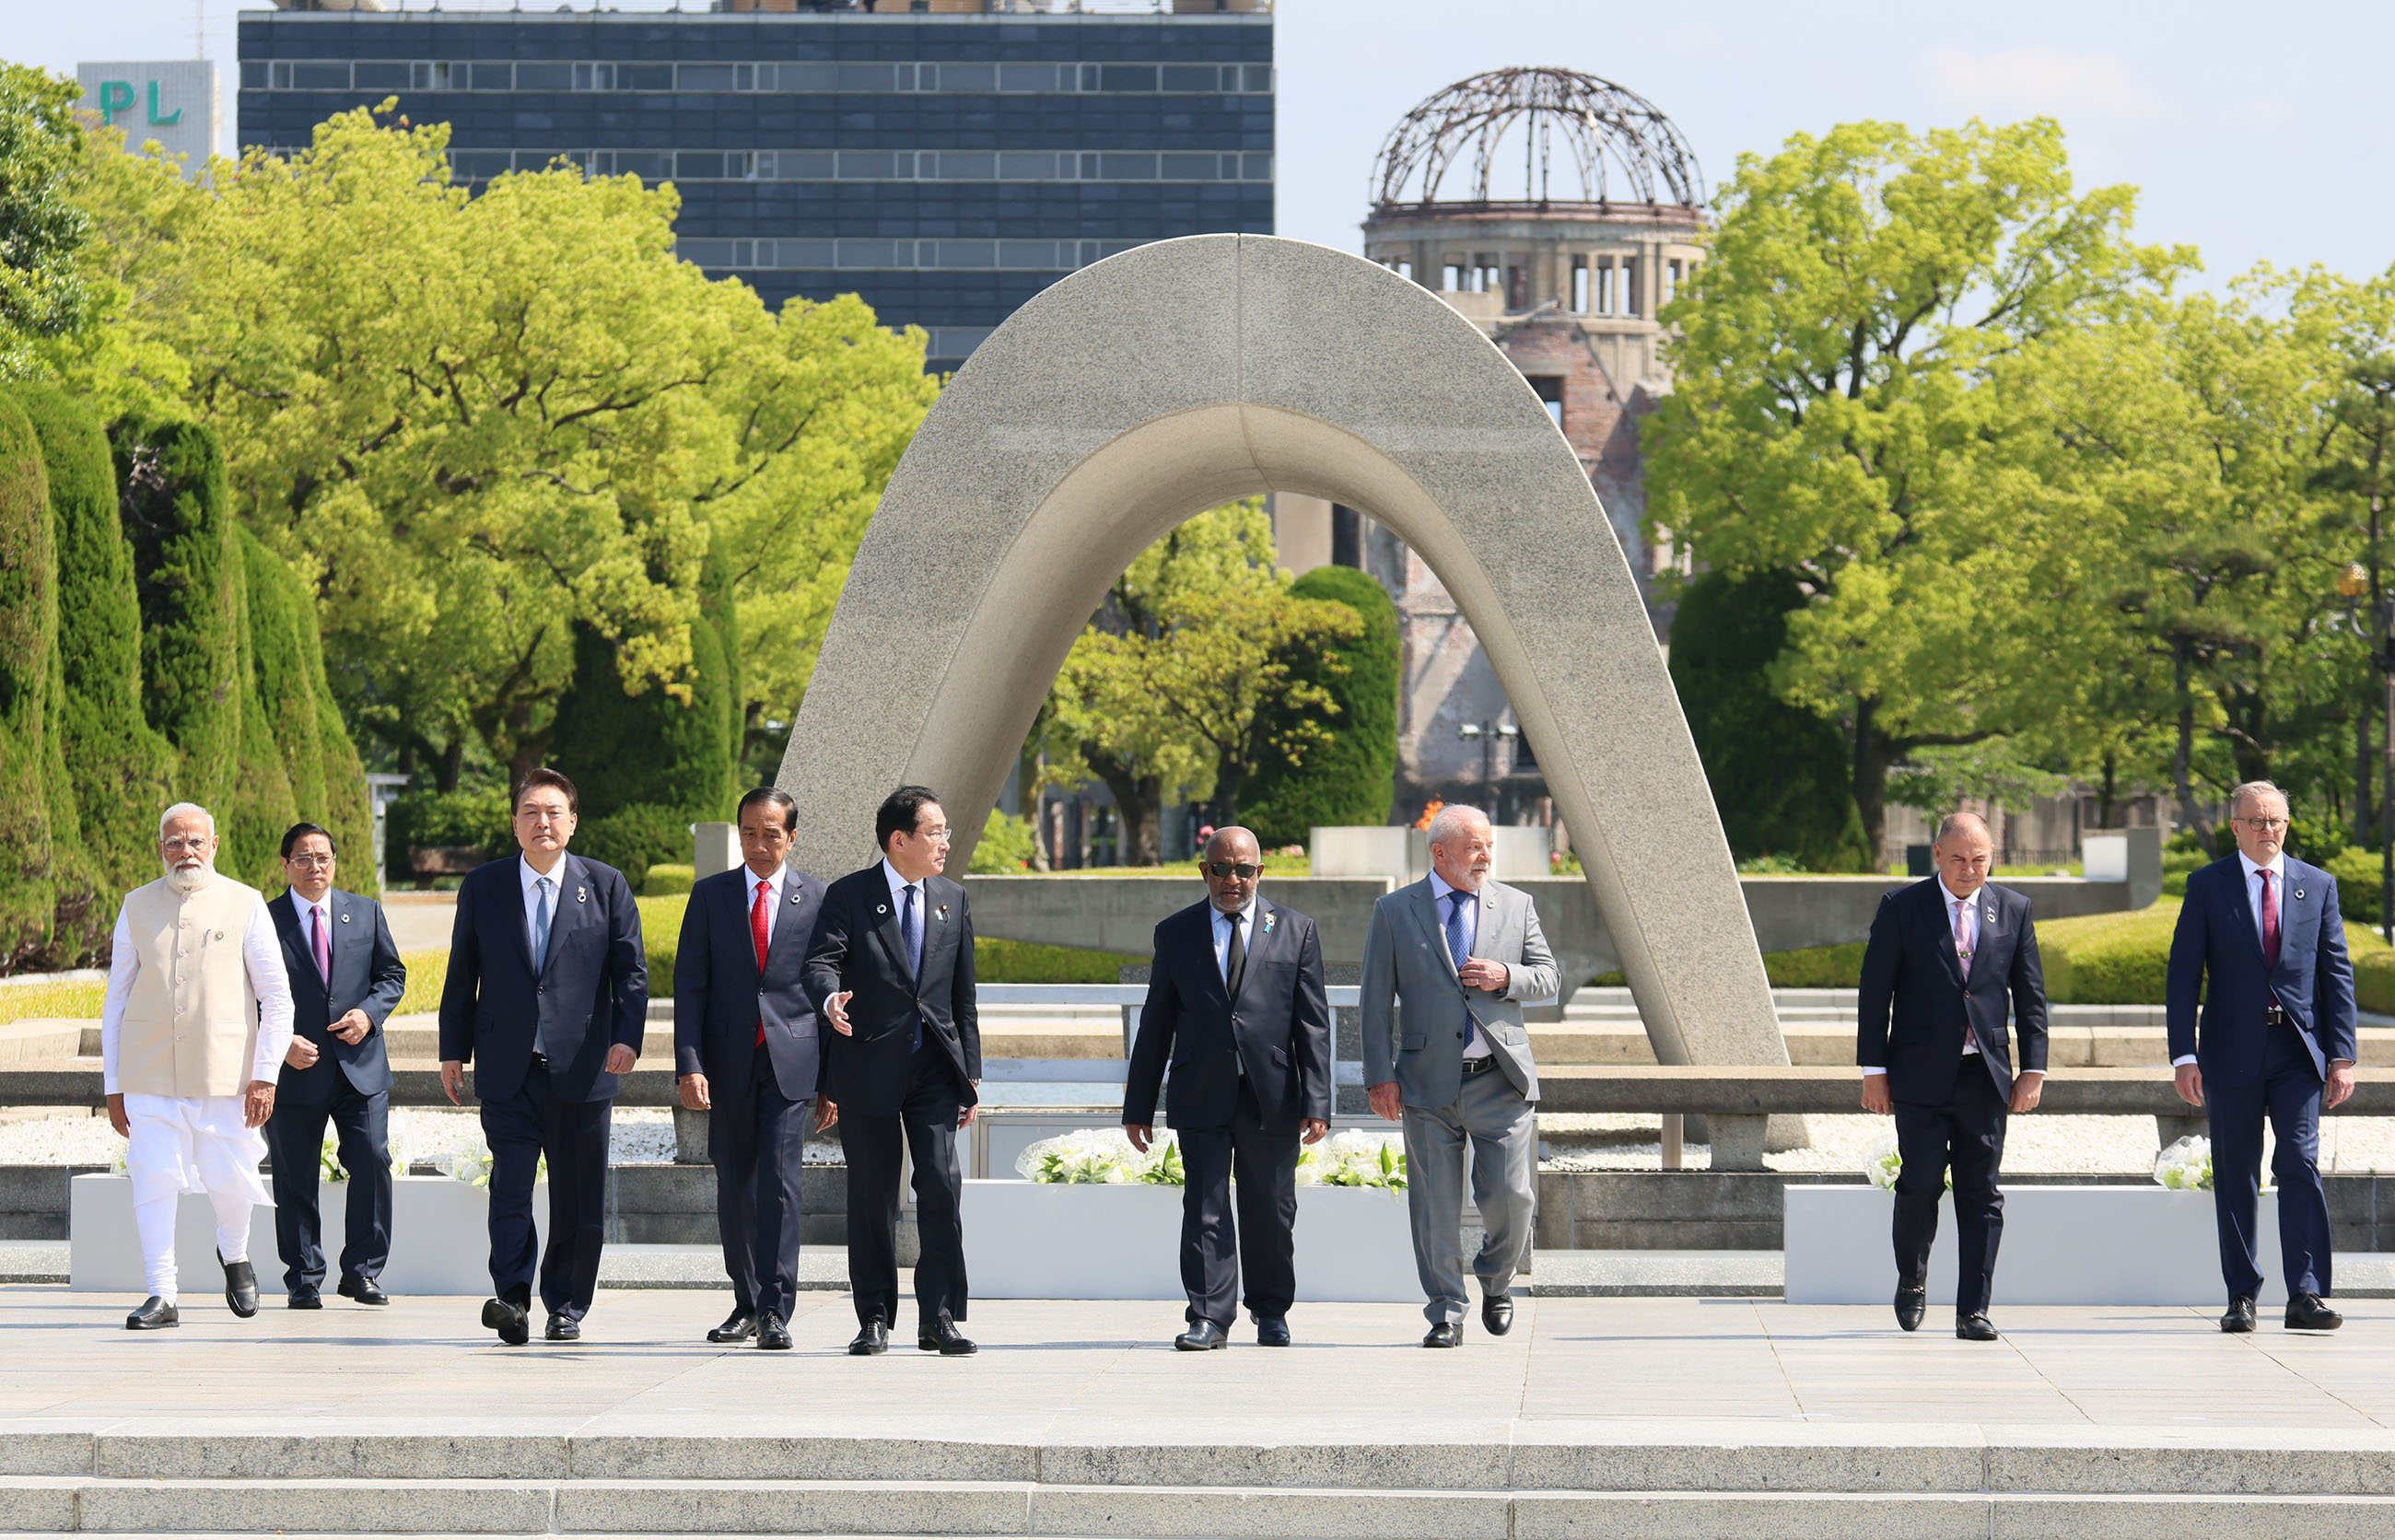 Prime Minister Kishida laying flowers at the Cenotaph for the Atomic Bomb Victims (4)